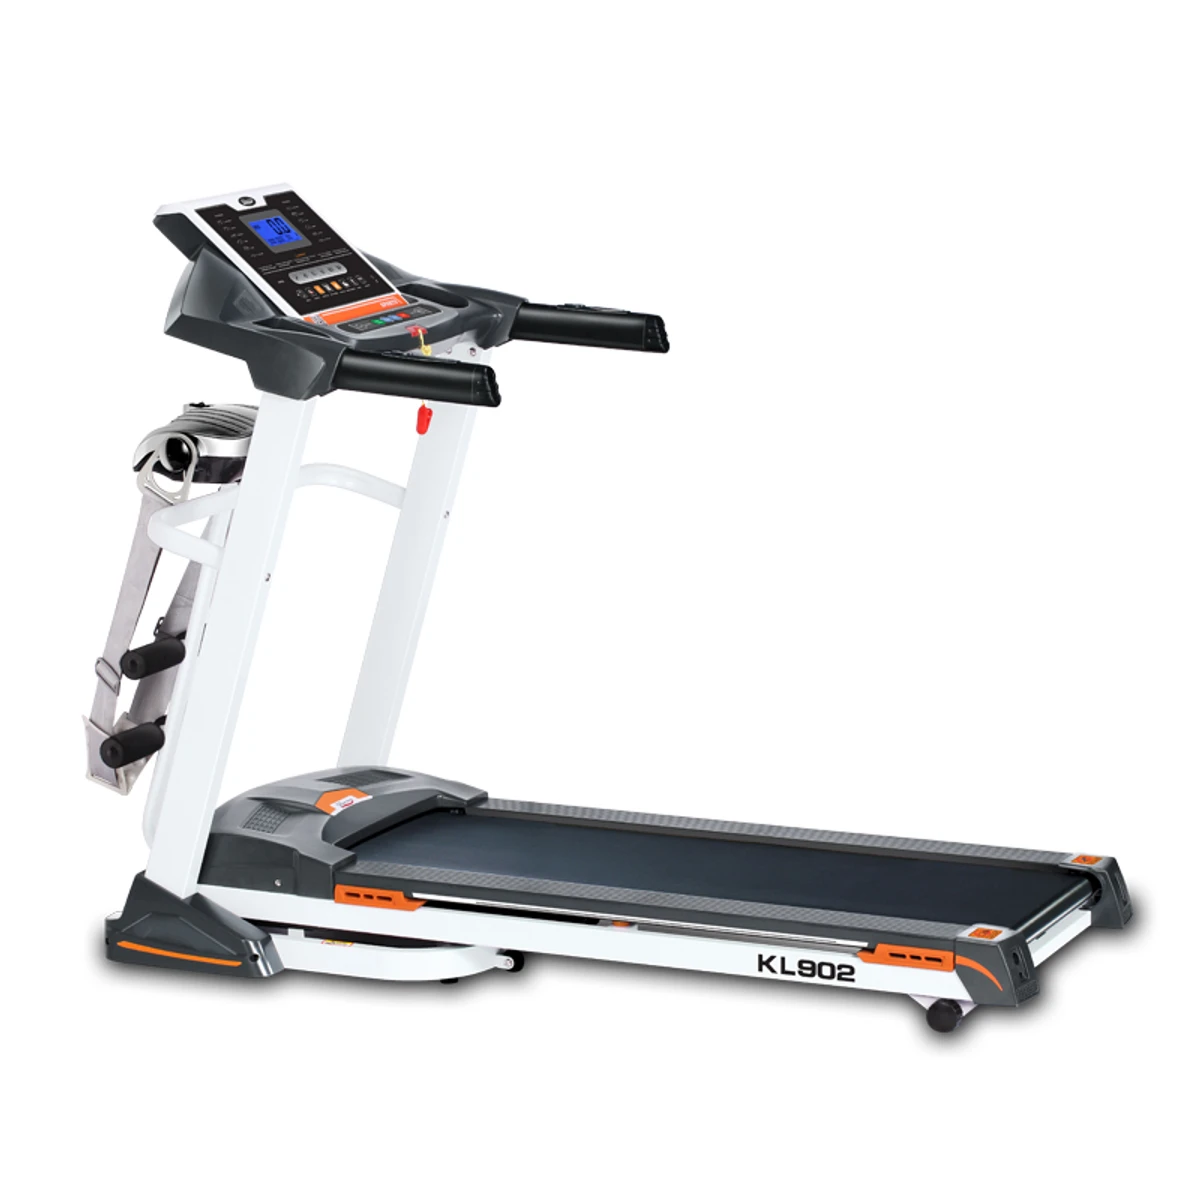 Daily youth KL902 Multi-function Foldable Motorized Treadmill